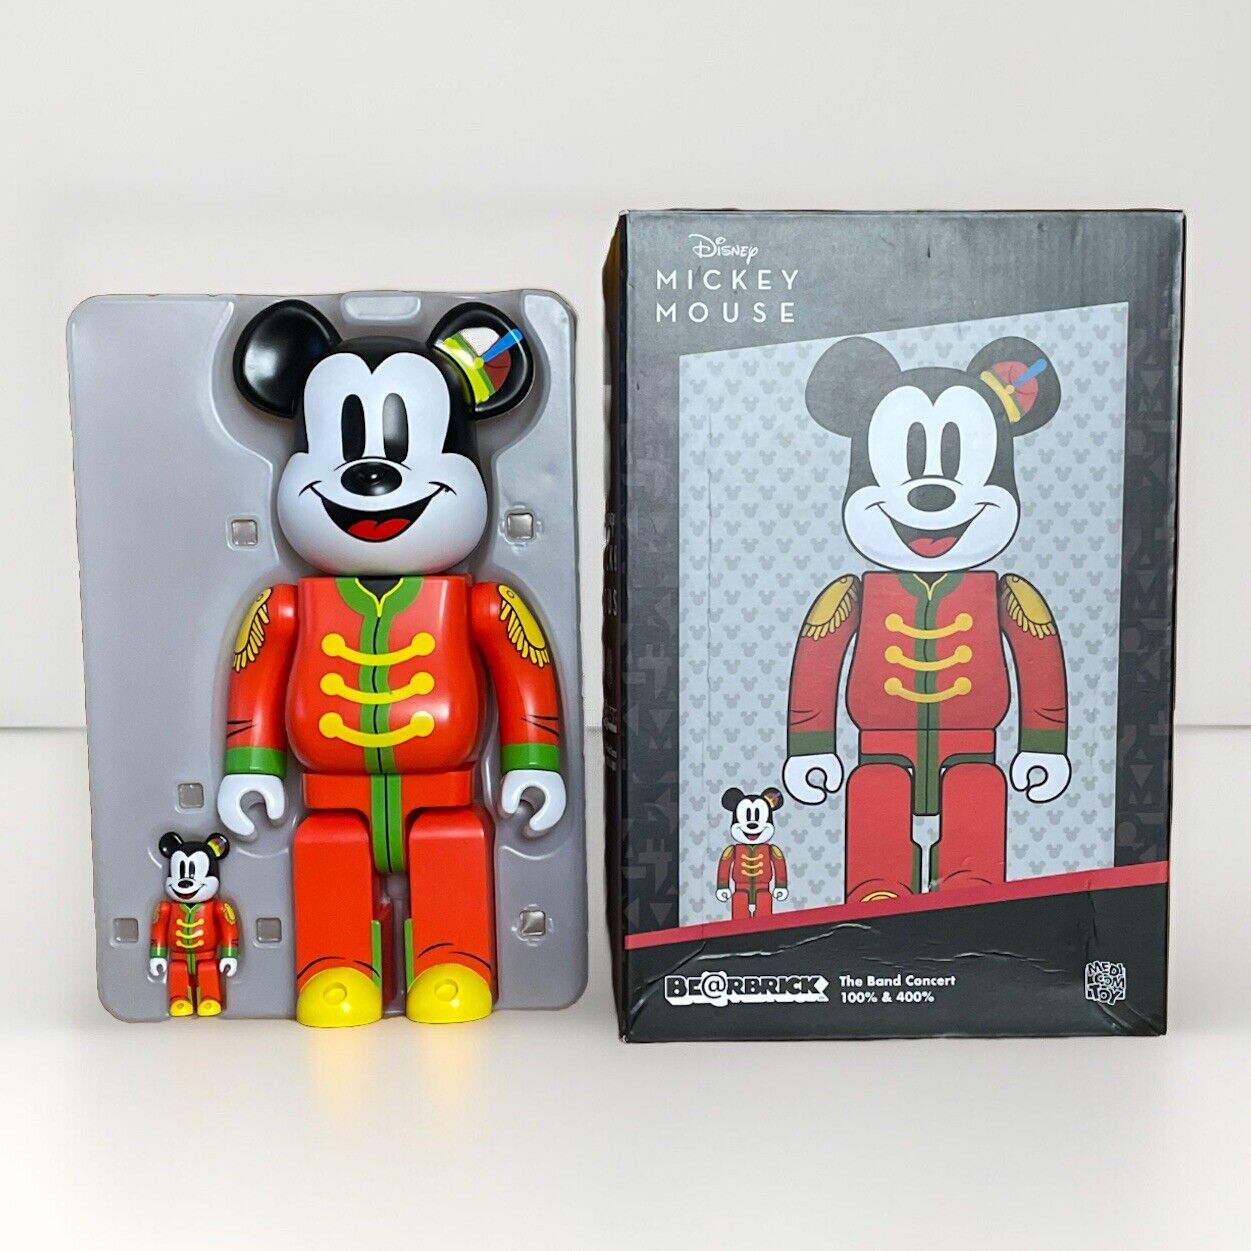 Disney Mickey Mouse “The Band Concert” 100% & 400% Bearbrick Set by Medicom Toy